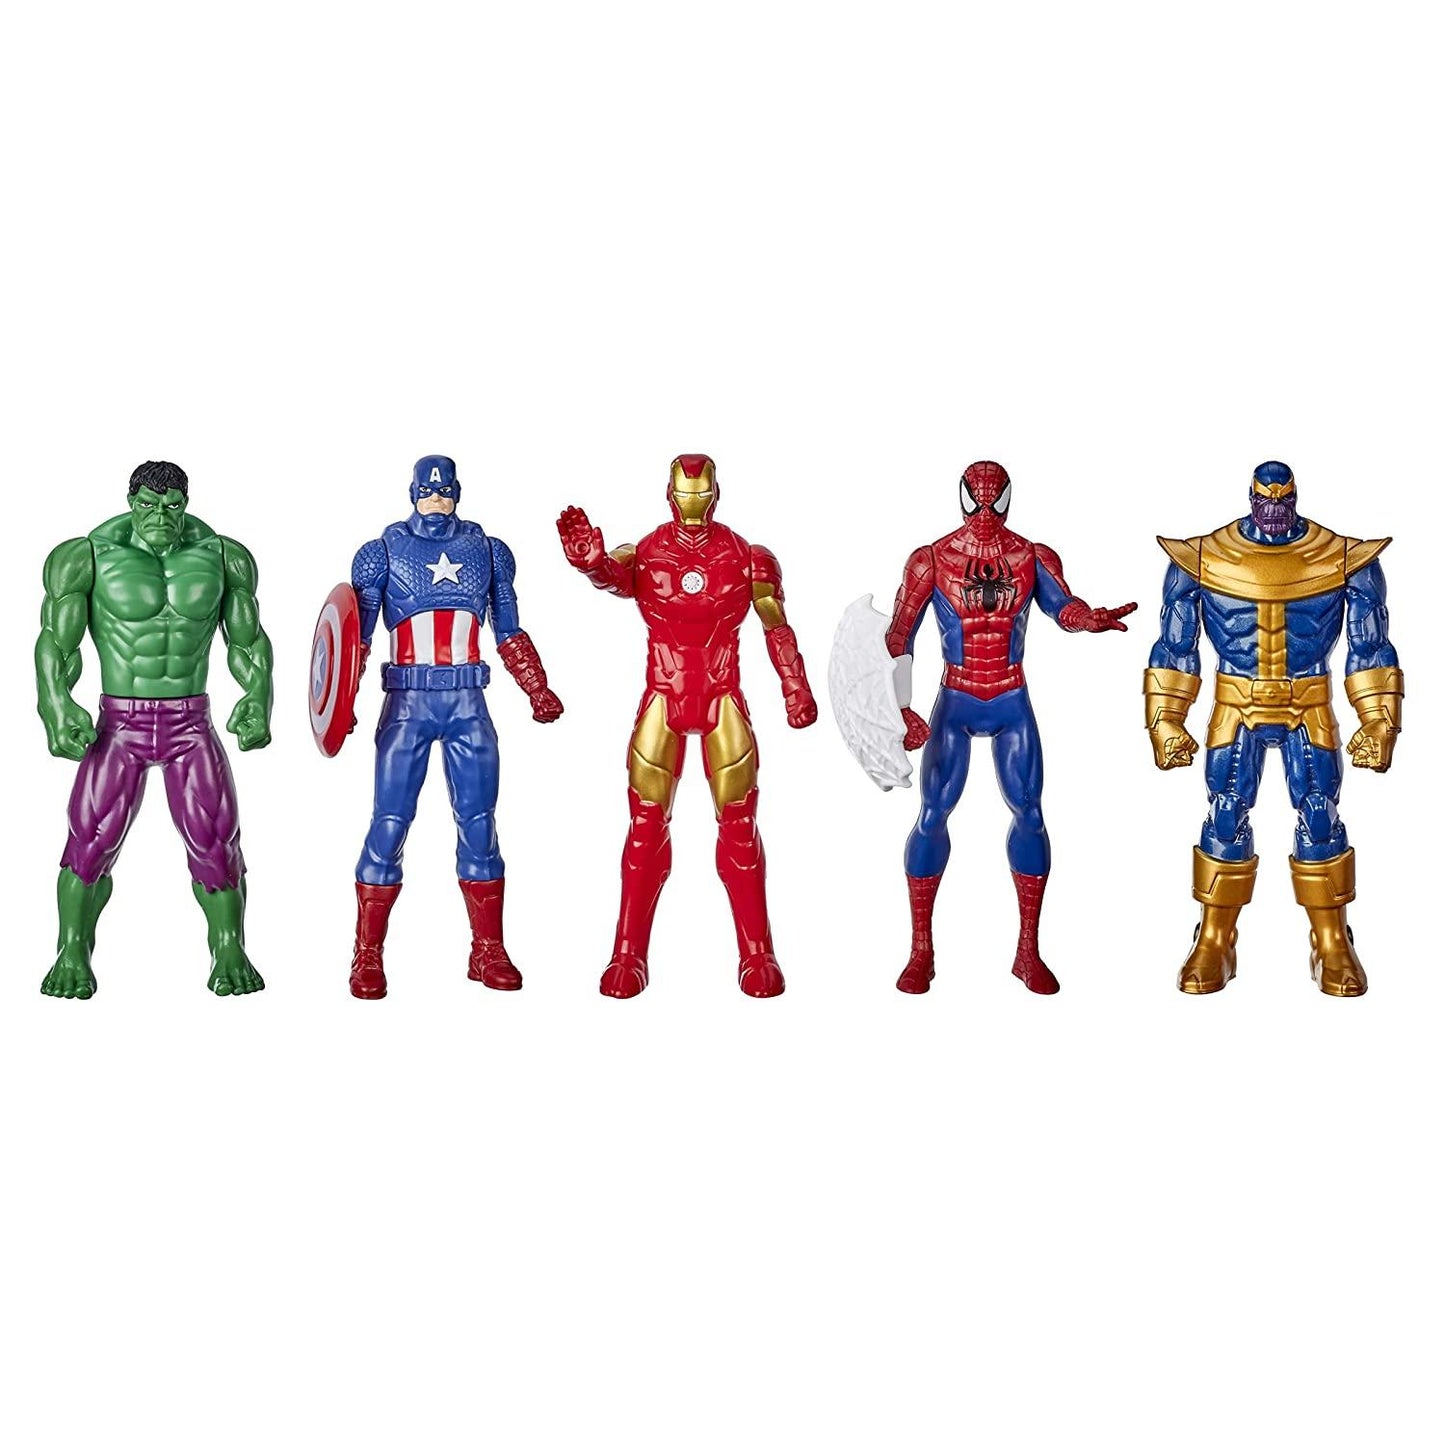 Marvel 6 Inch Super Heroes Iron Man, Spider-Man, Captain America, Hulk, Thanos Action Figure, Pack Of 5 | Hasbro | Sams toy - samstoy.in